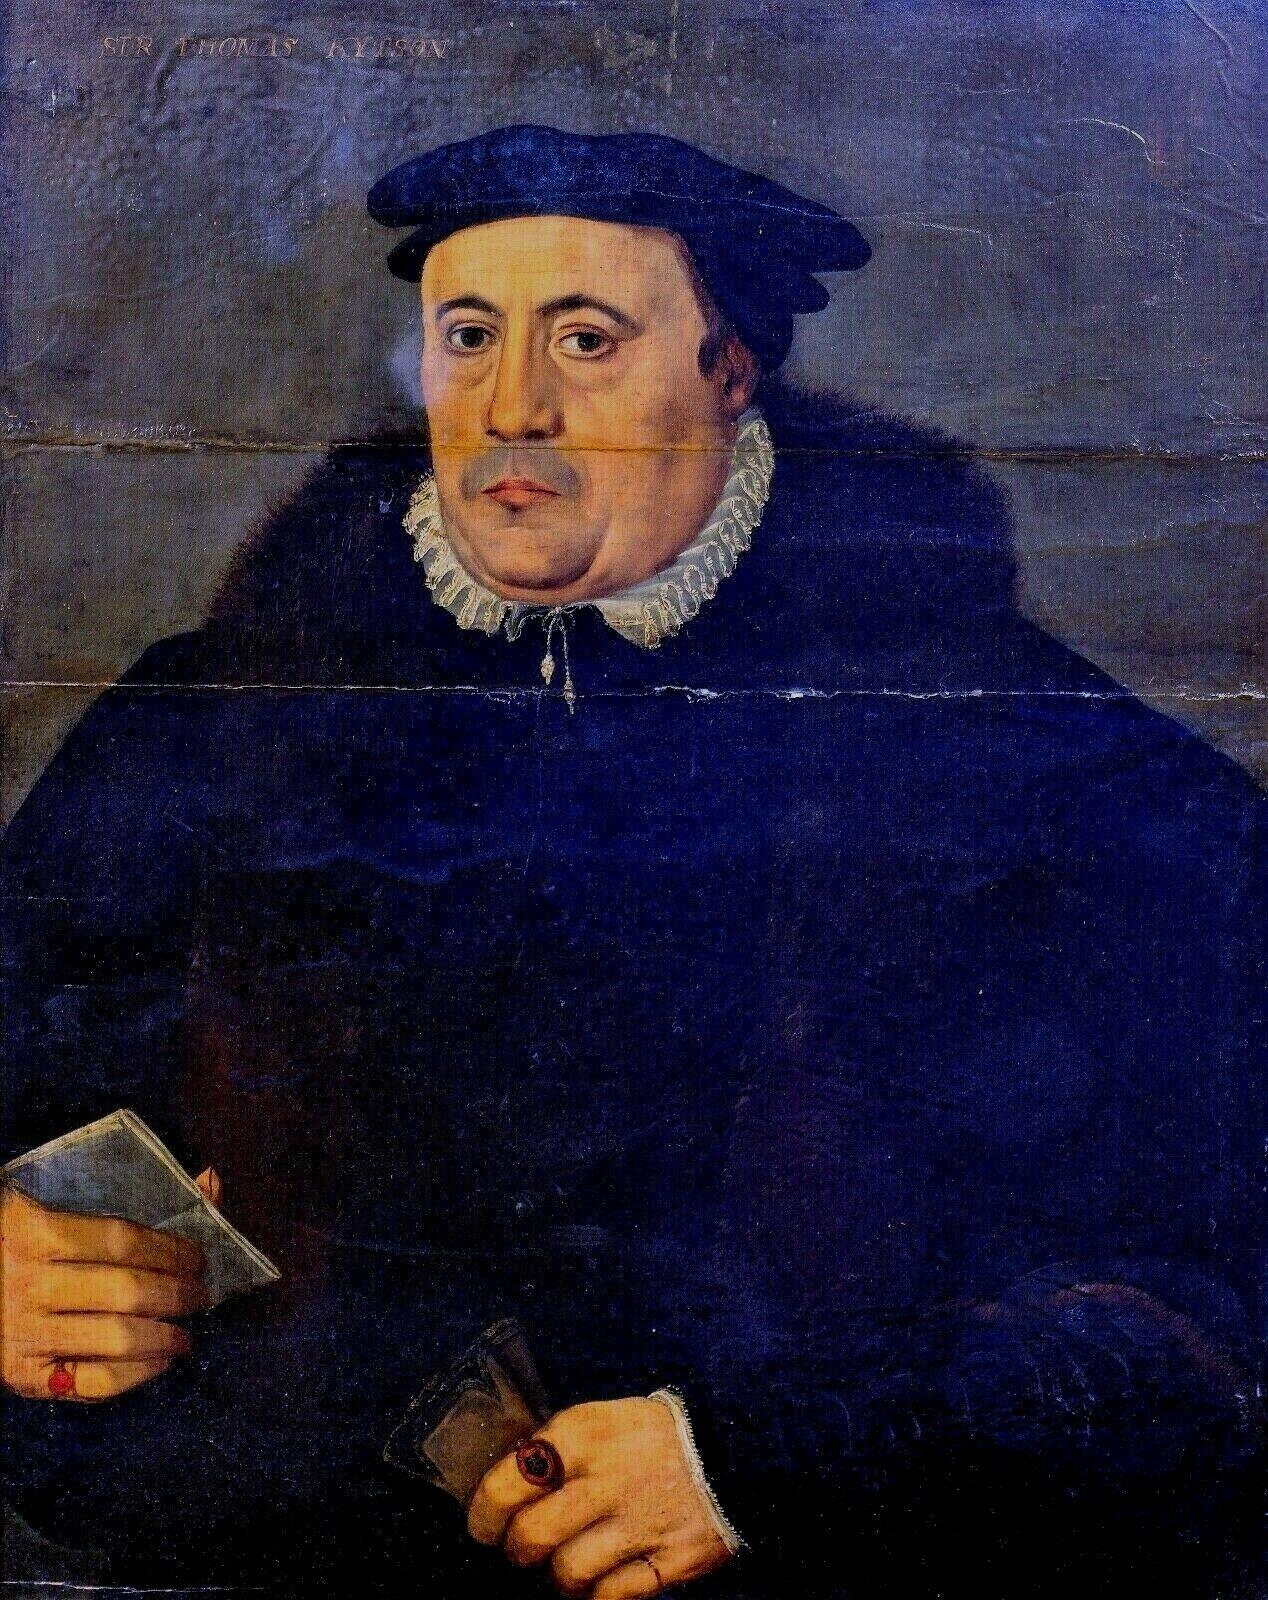 Sir Thomas Kitson (1485 – 11 September 1540), Sheriff Of London, 16th Century - Painting by Hans Holbein